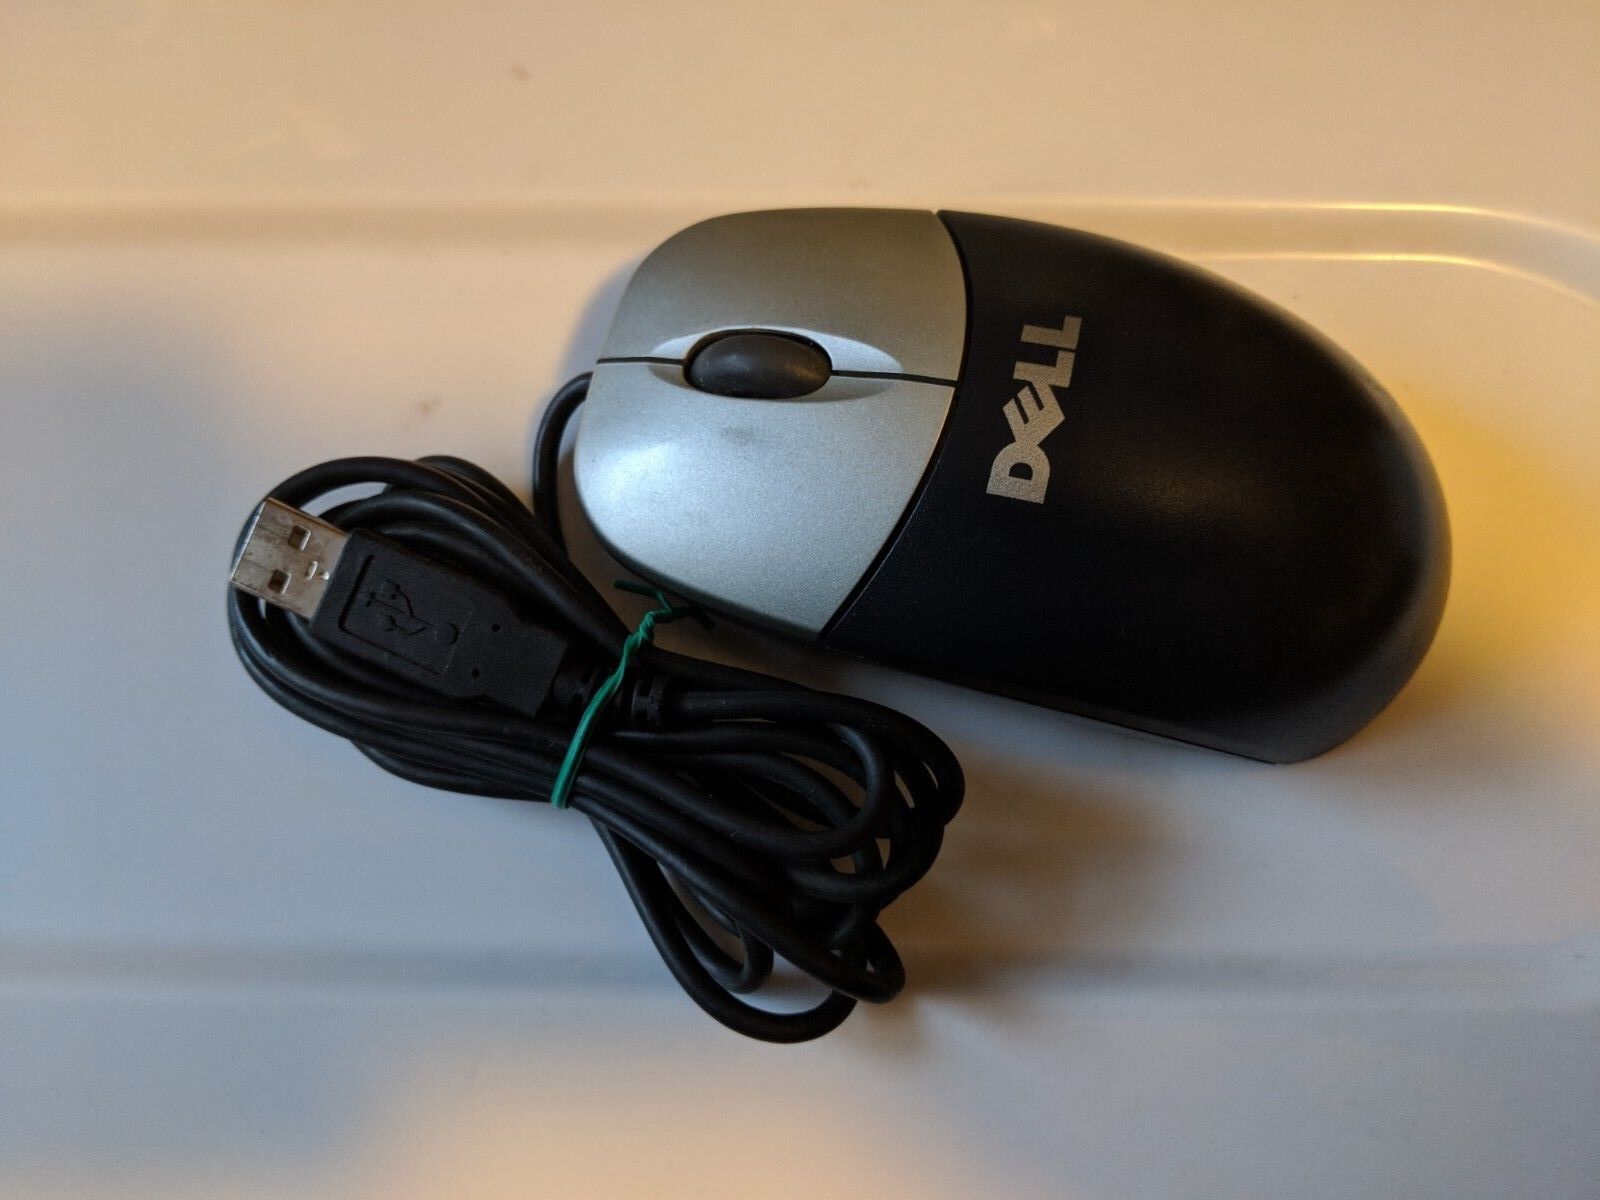 Genuine Dell (MO56UO) USB Wired Optical Laser Standard Black/Silver Mouse 